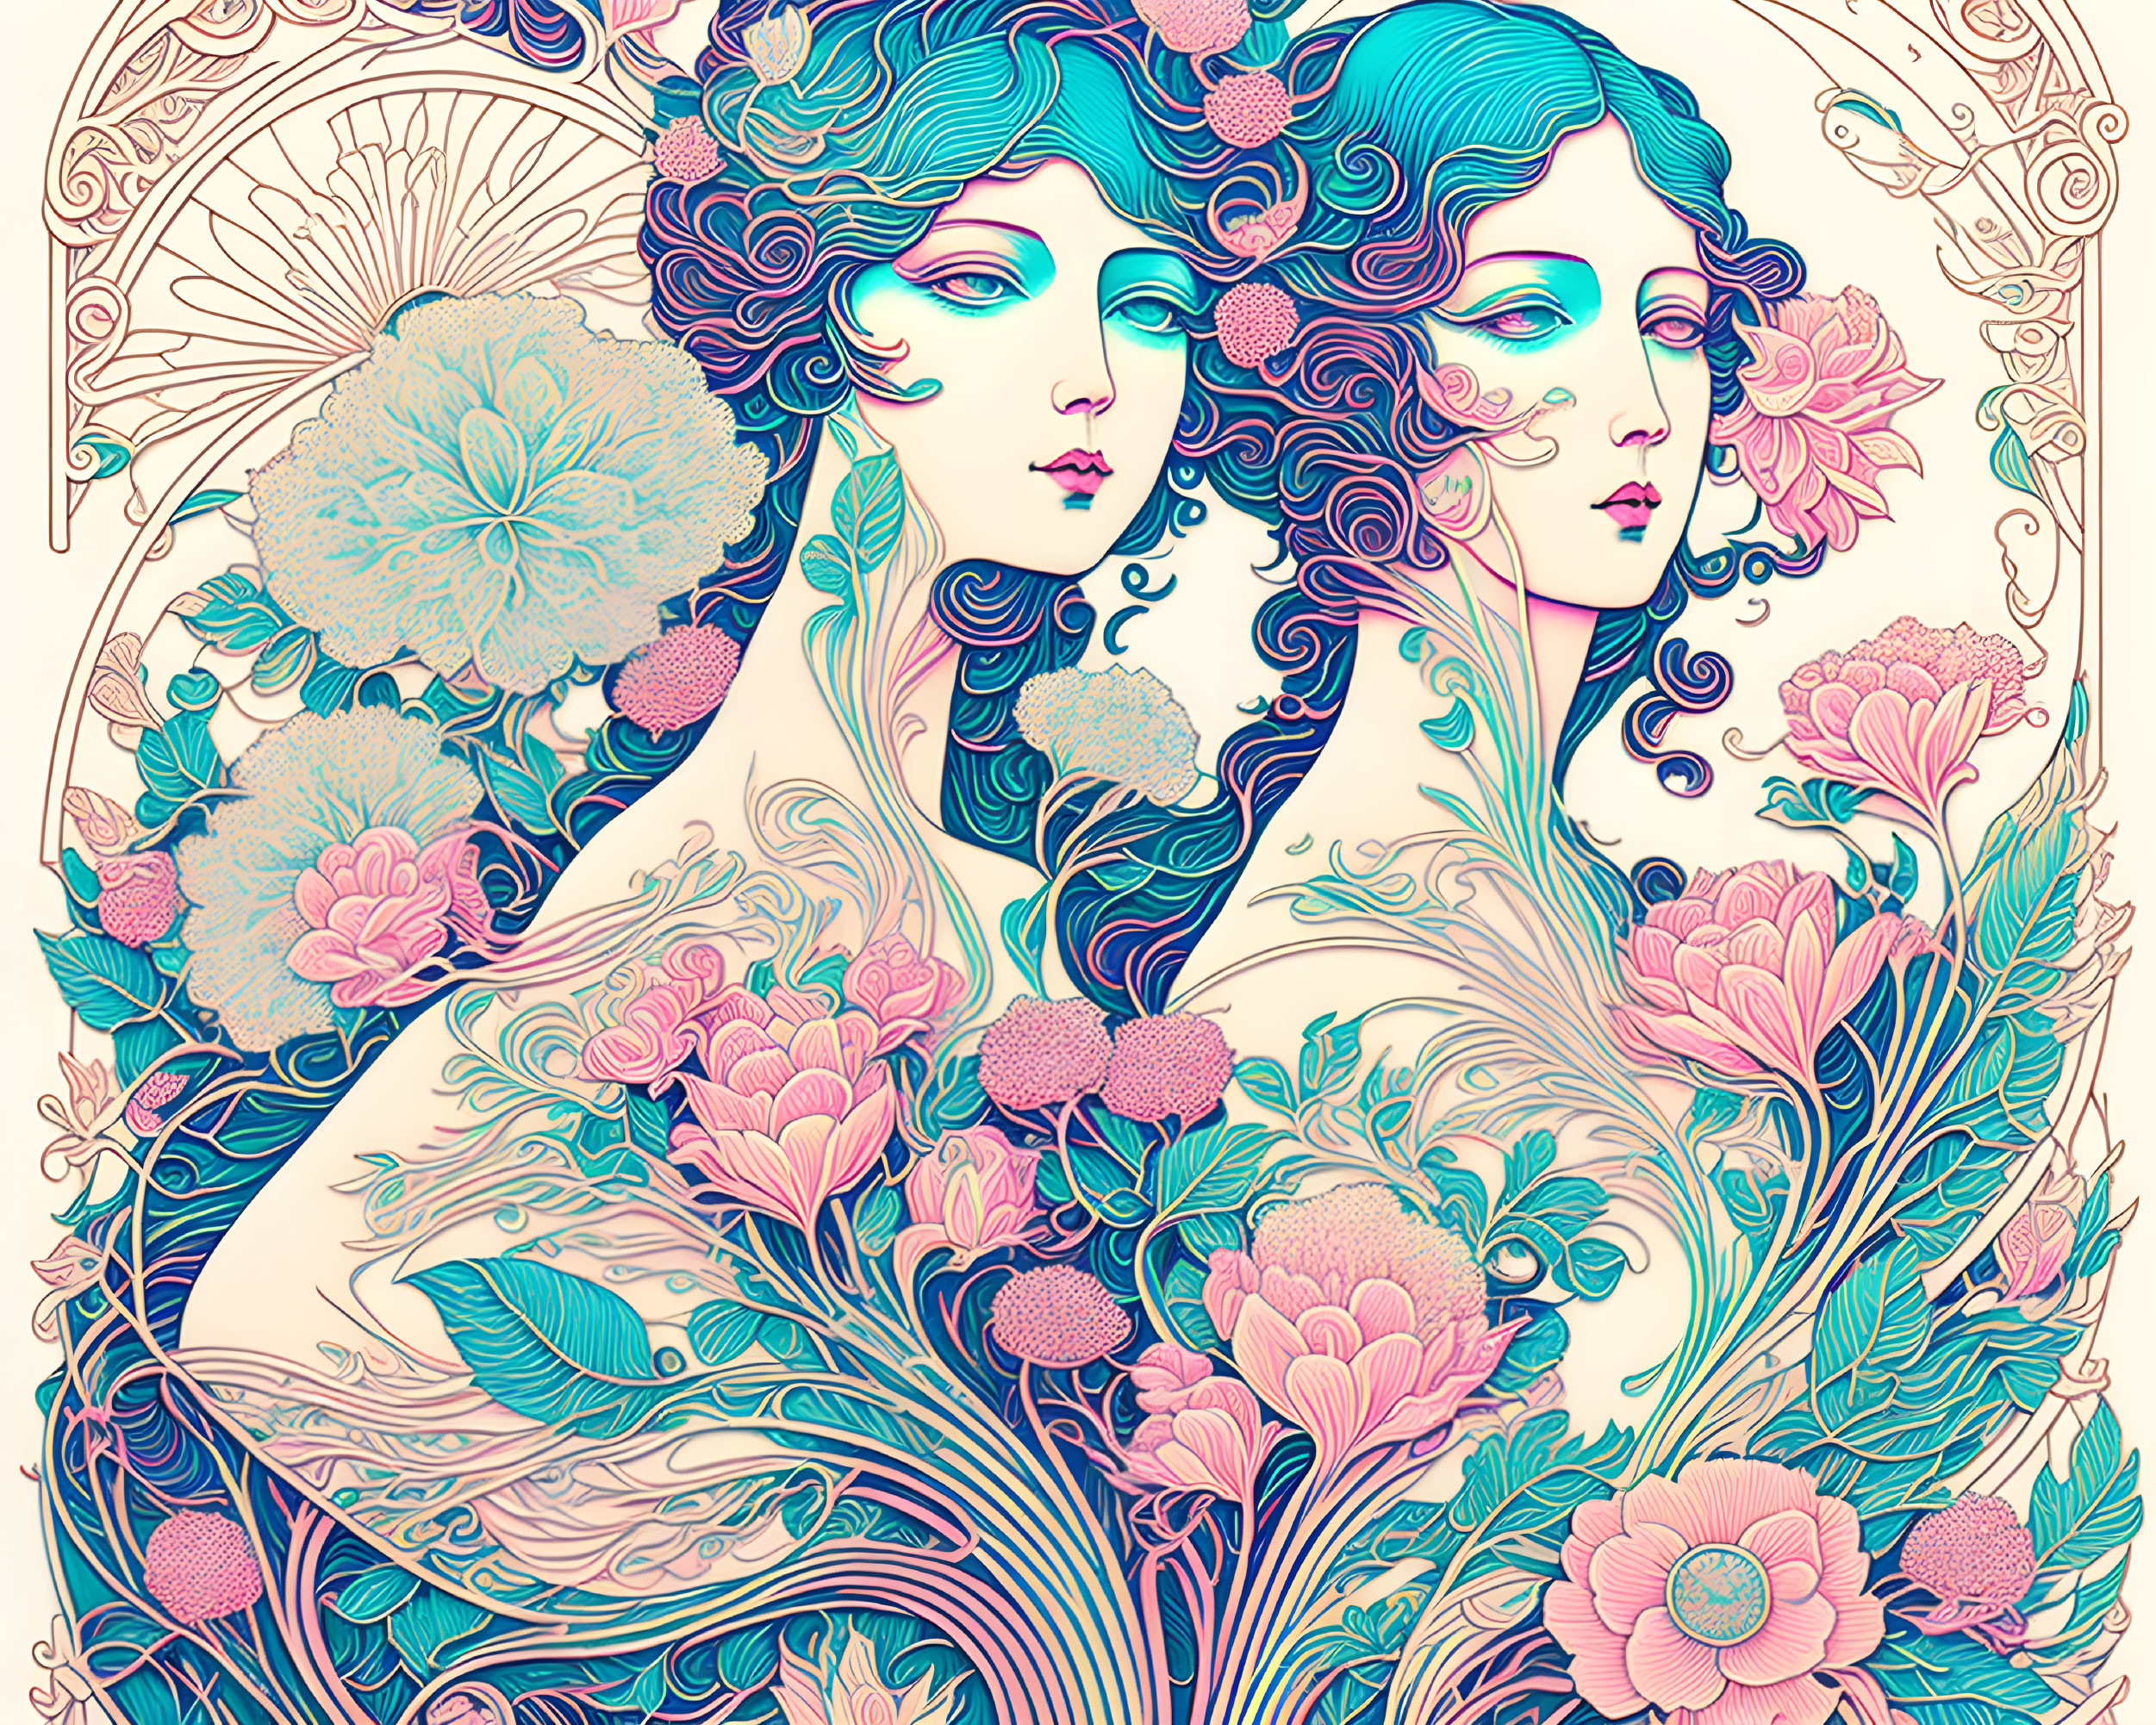 Detailed Art Nouveau Style Illustration of Twin Women with Floral Motifs